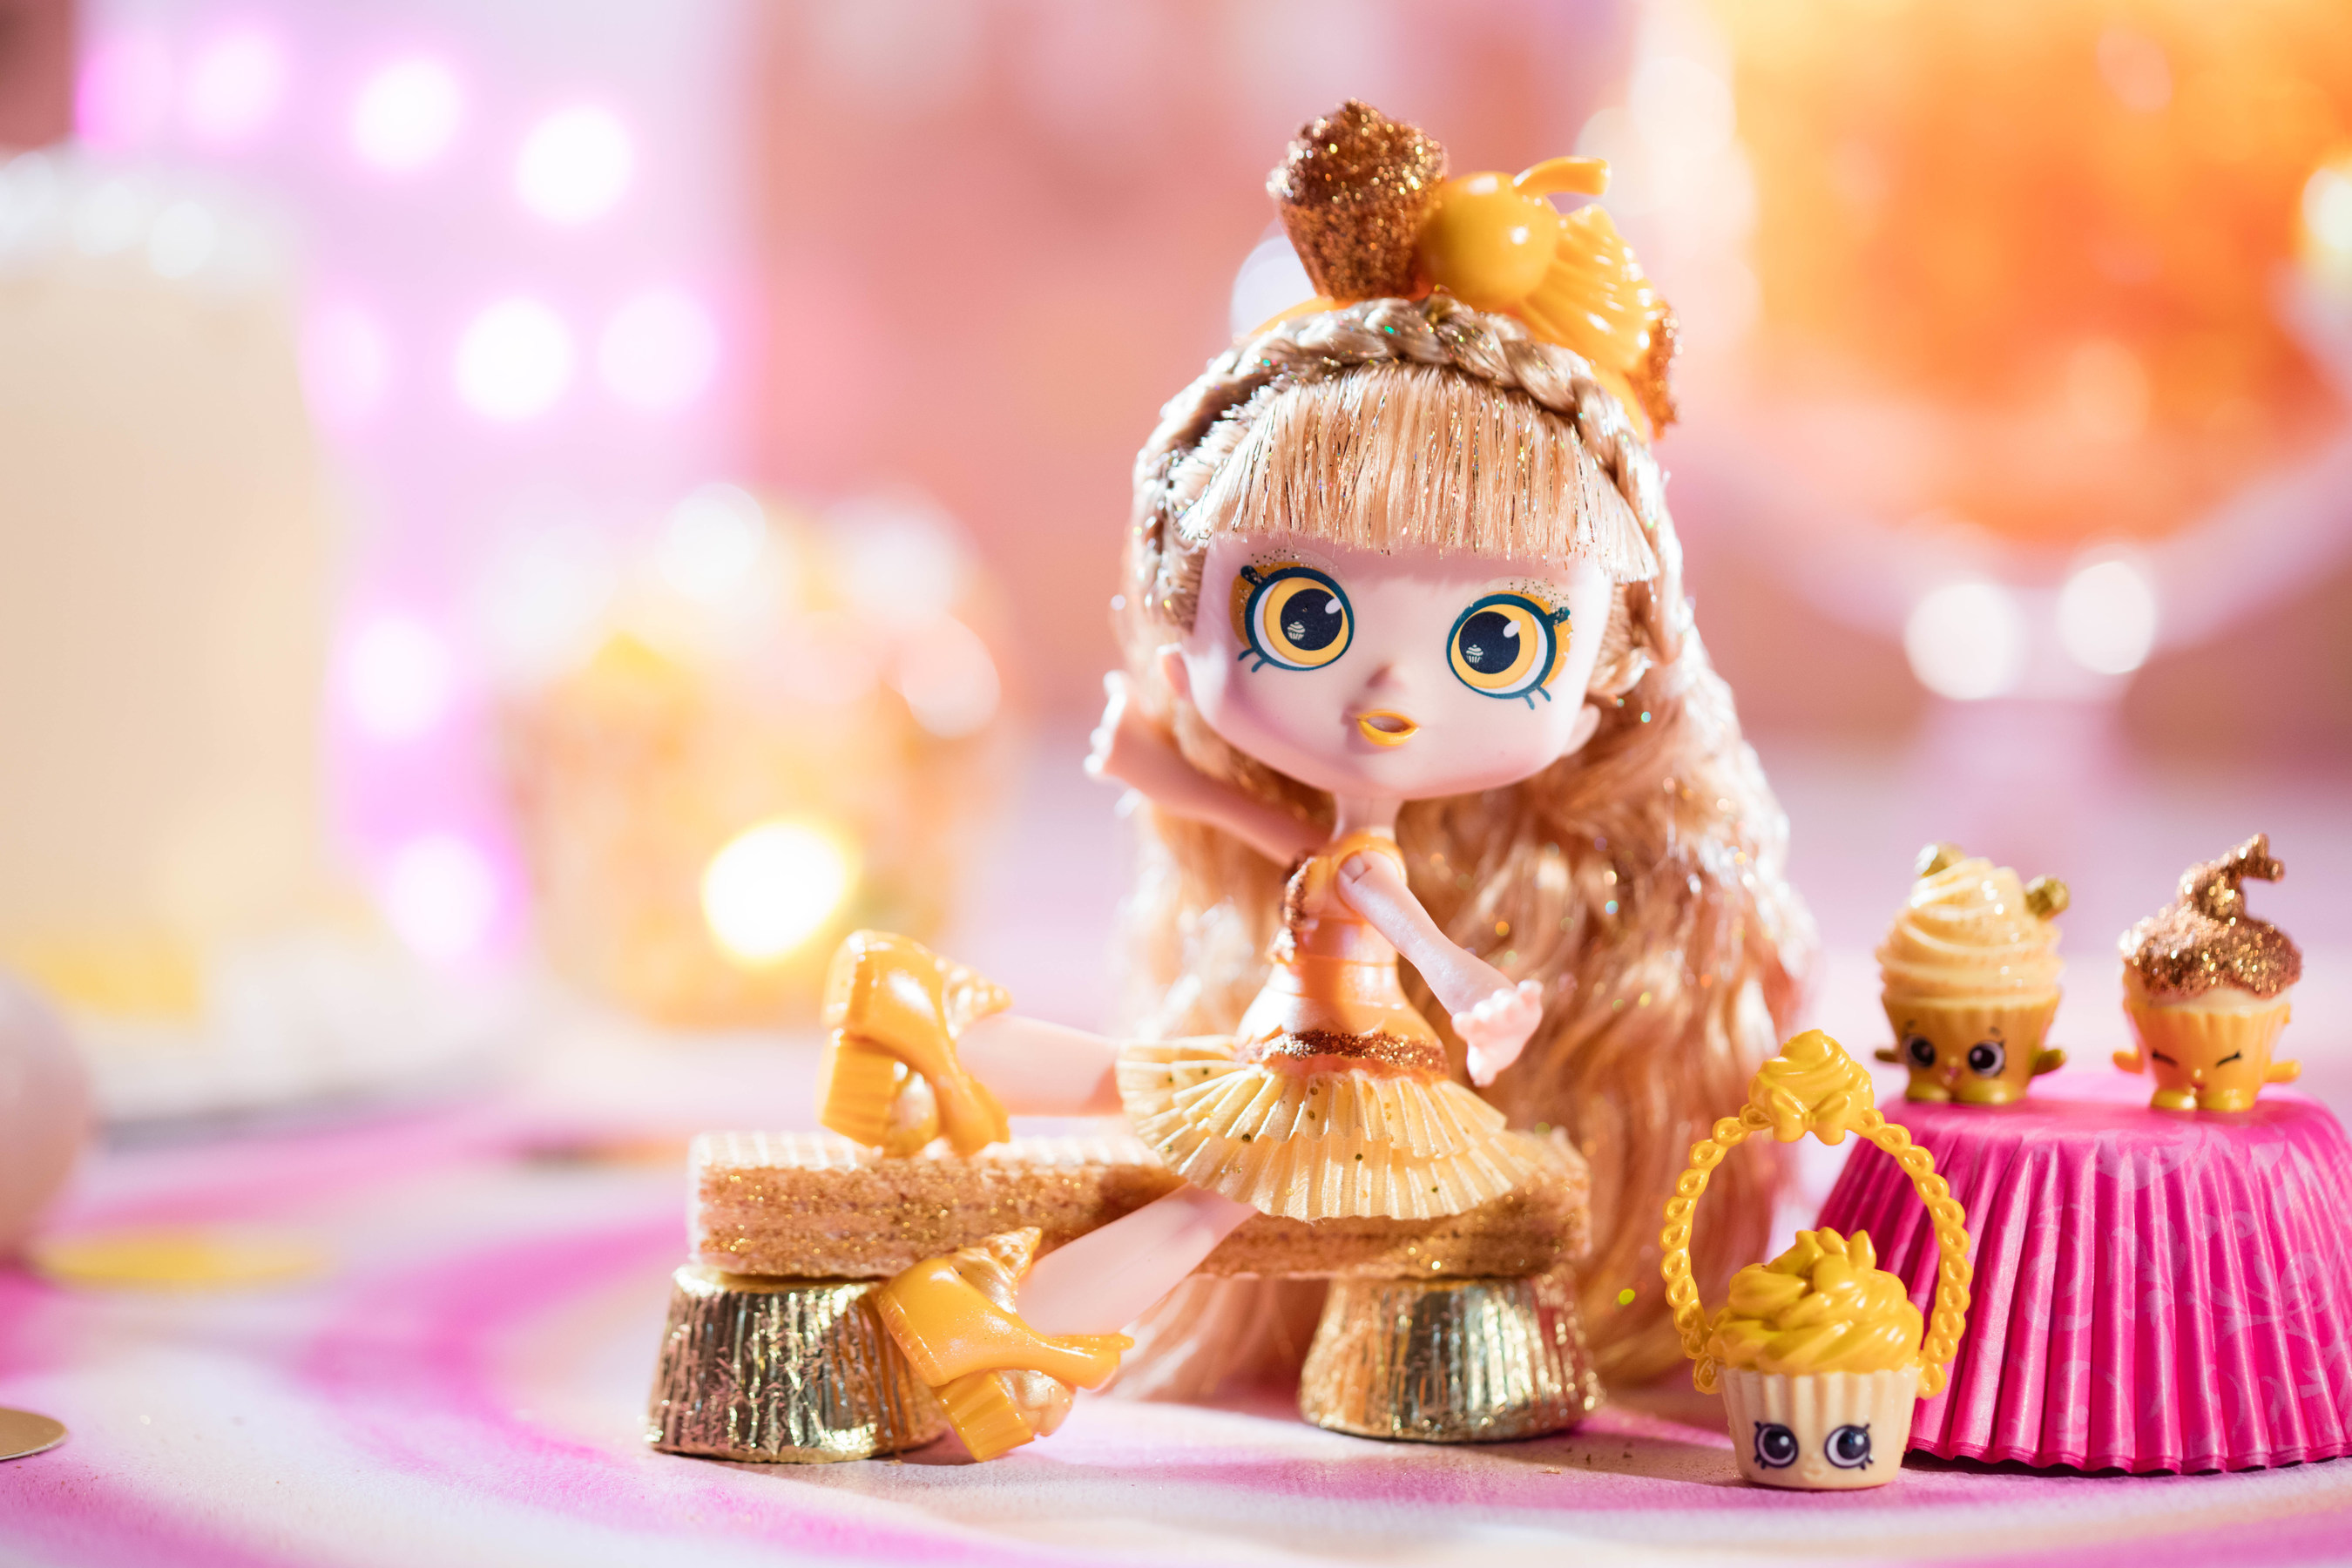 Moose Toys, creators of the Shopkins collectible craze, makes its first-ever appearance at San Diego Comic-Con with the debut of Jessicake Limited Edition Golden Cupcake, the most rare doll to join the popular Shoppies line.